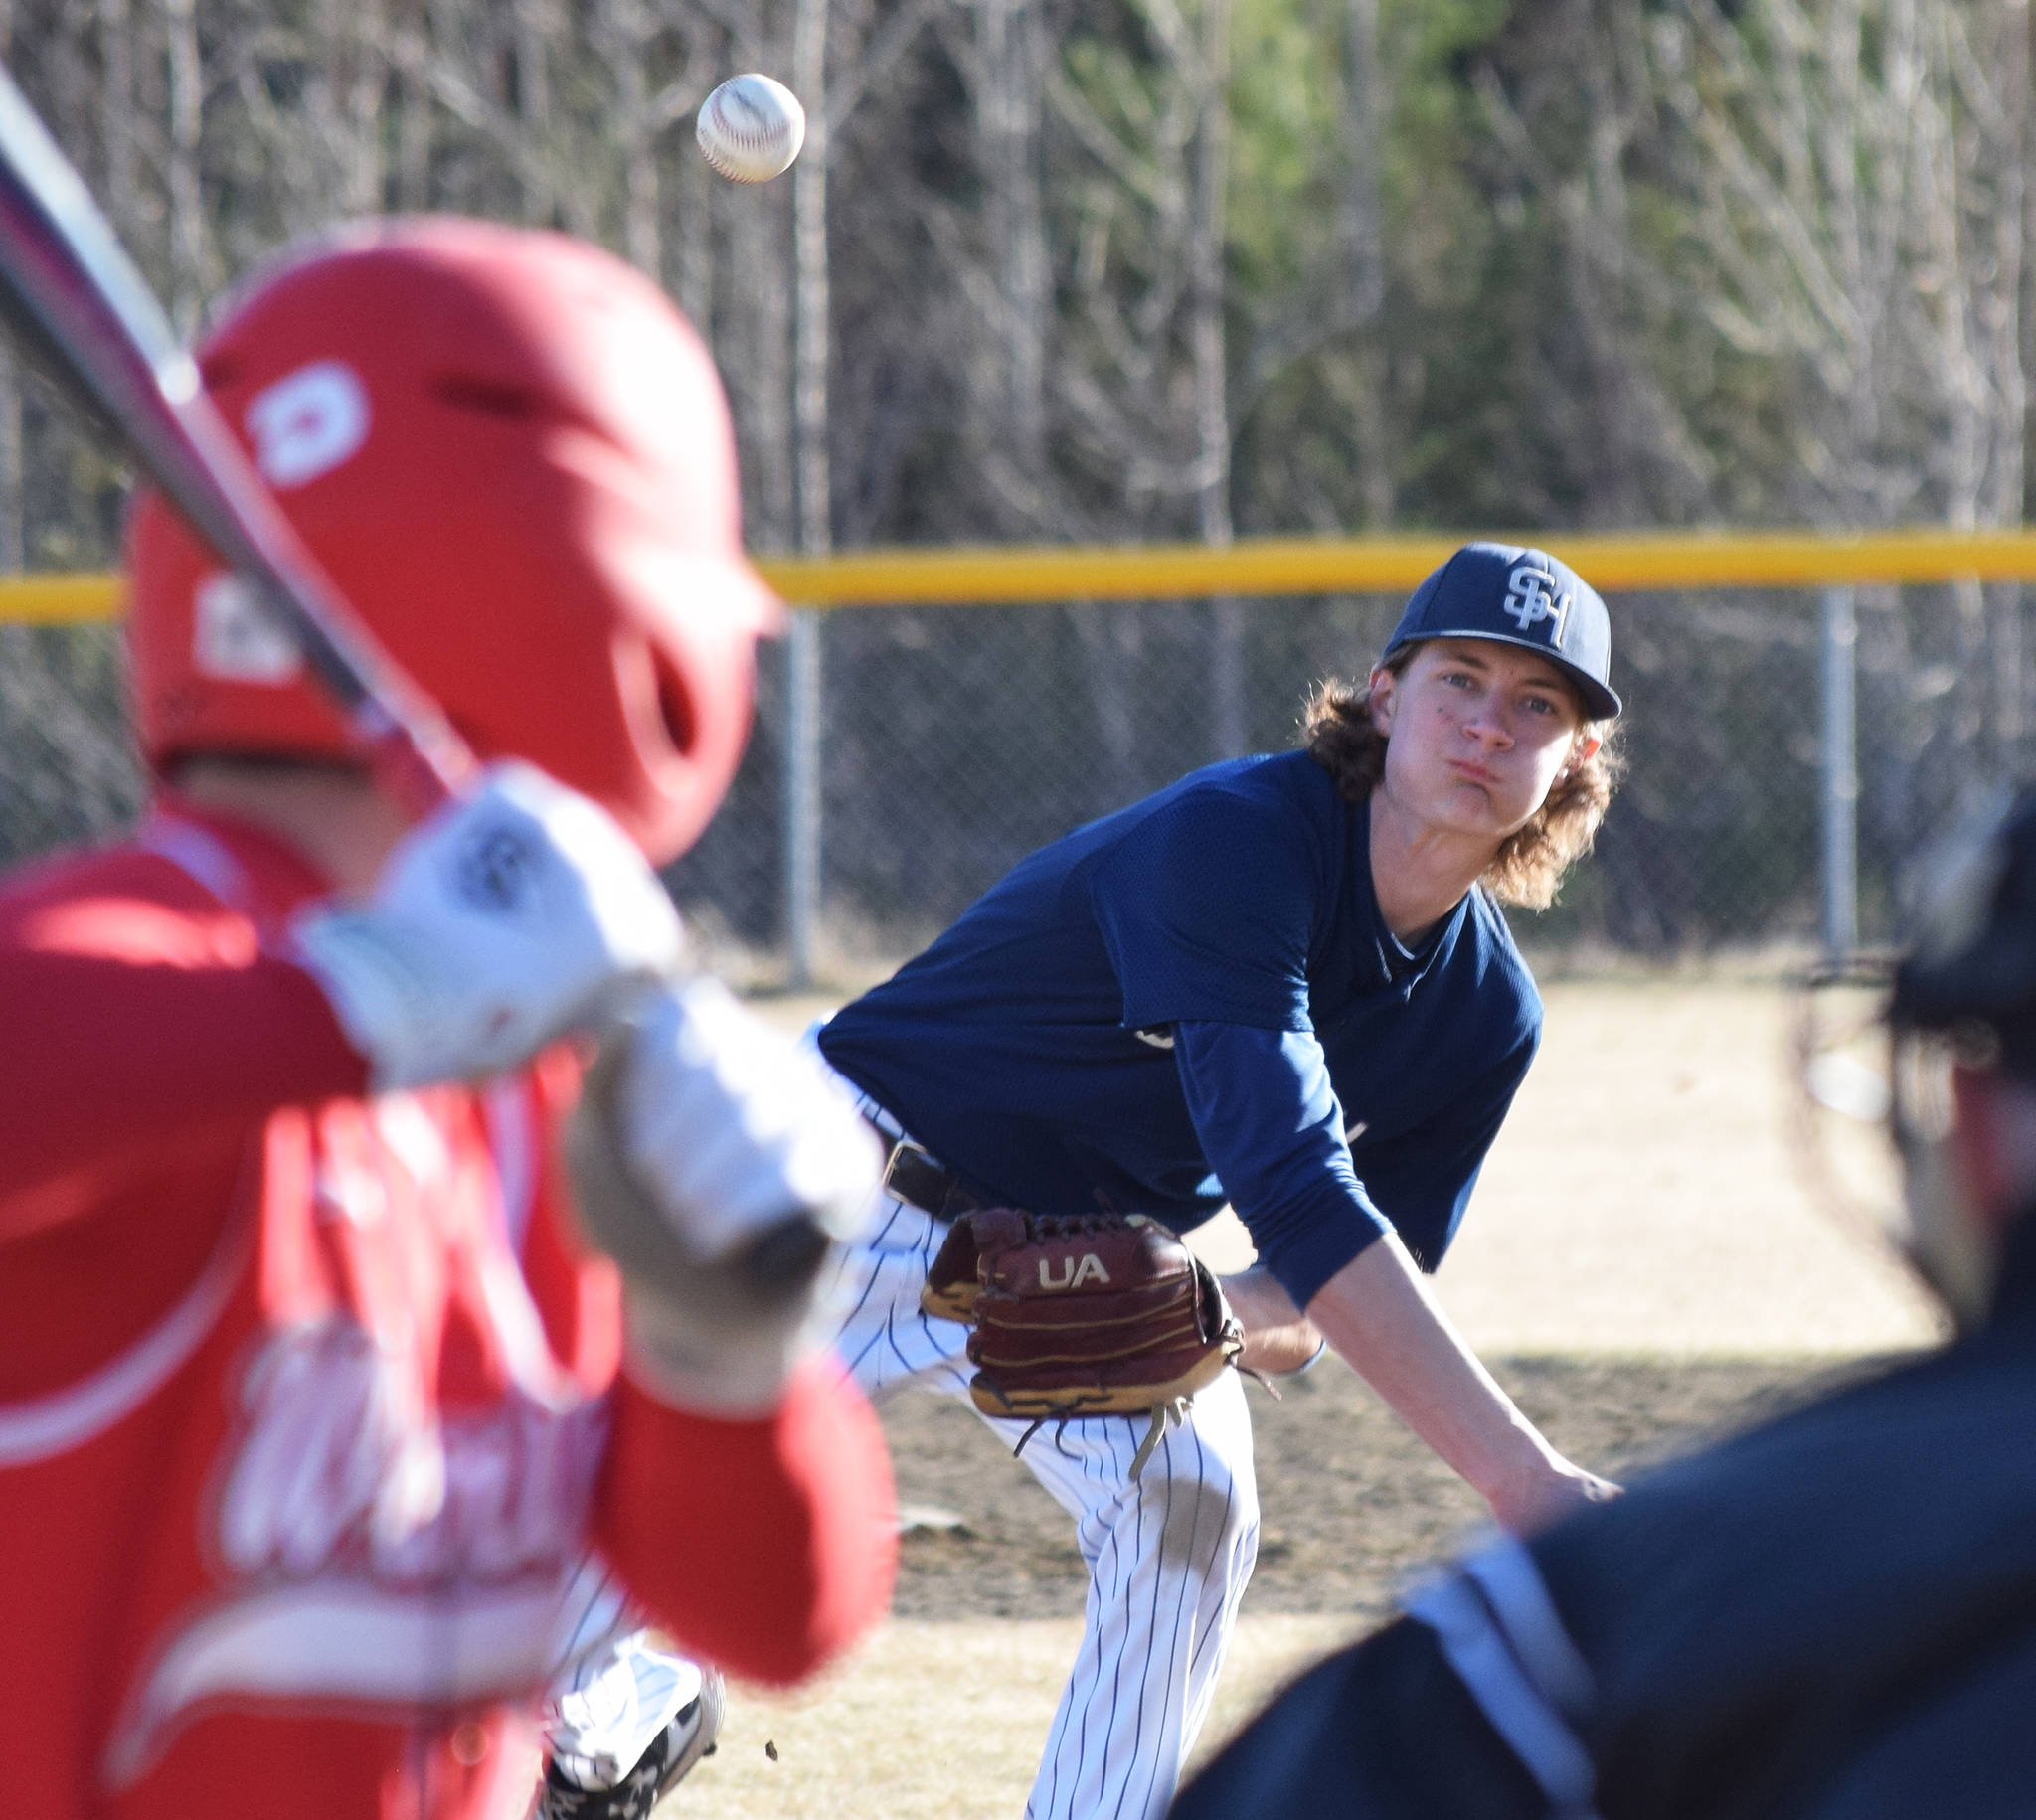 Soldotna’s Davey Belger offers up a pitch to a Wasilla batter in a Southcentral Conference contest Thursday, May 2, 2019, at the Soldotna Baseball Fields. (Photo by Joey Klecka/Peninsula Clarion)